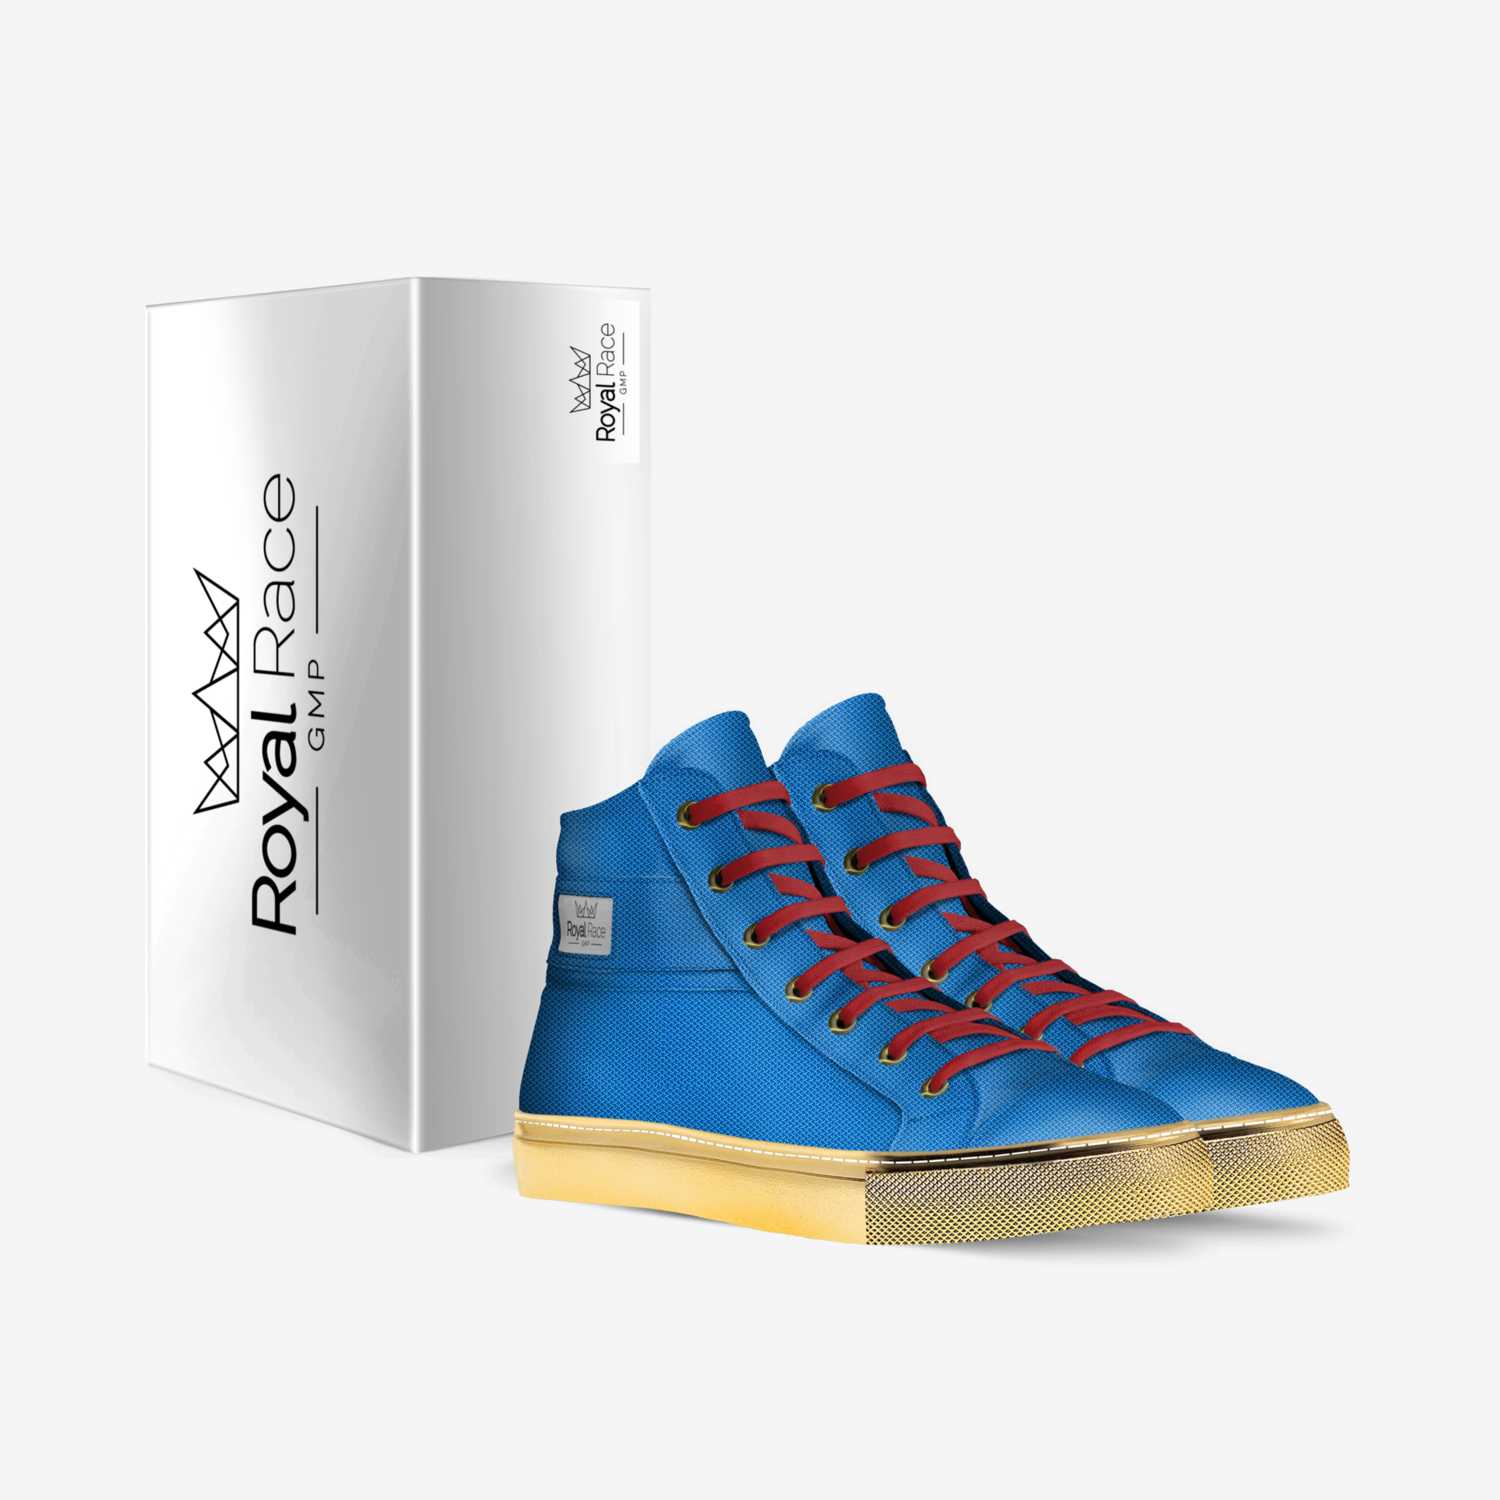 rr gmp custom made in Italy shoes by Guebli Carron | Box view